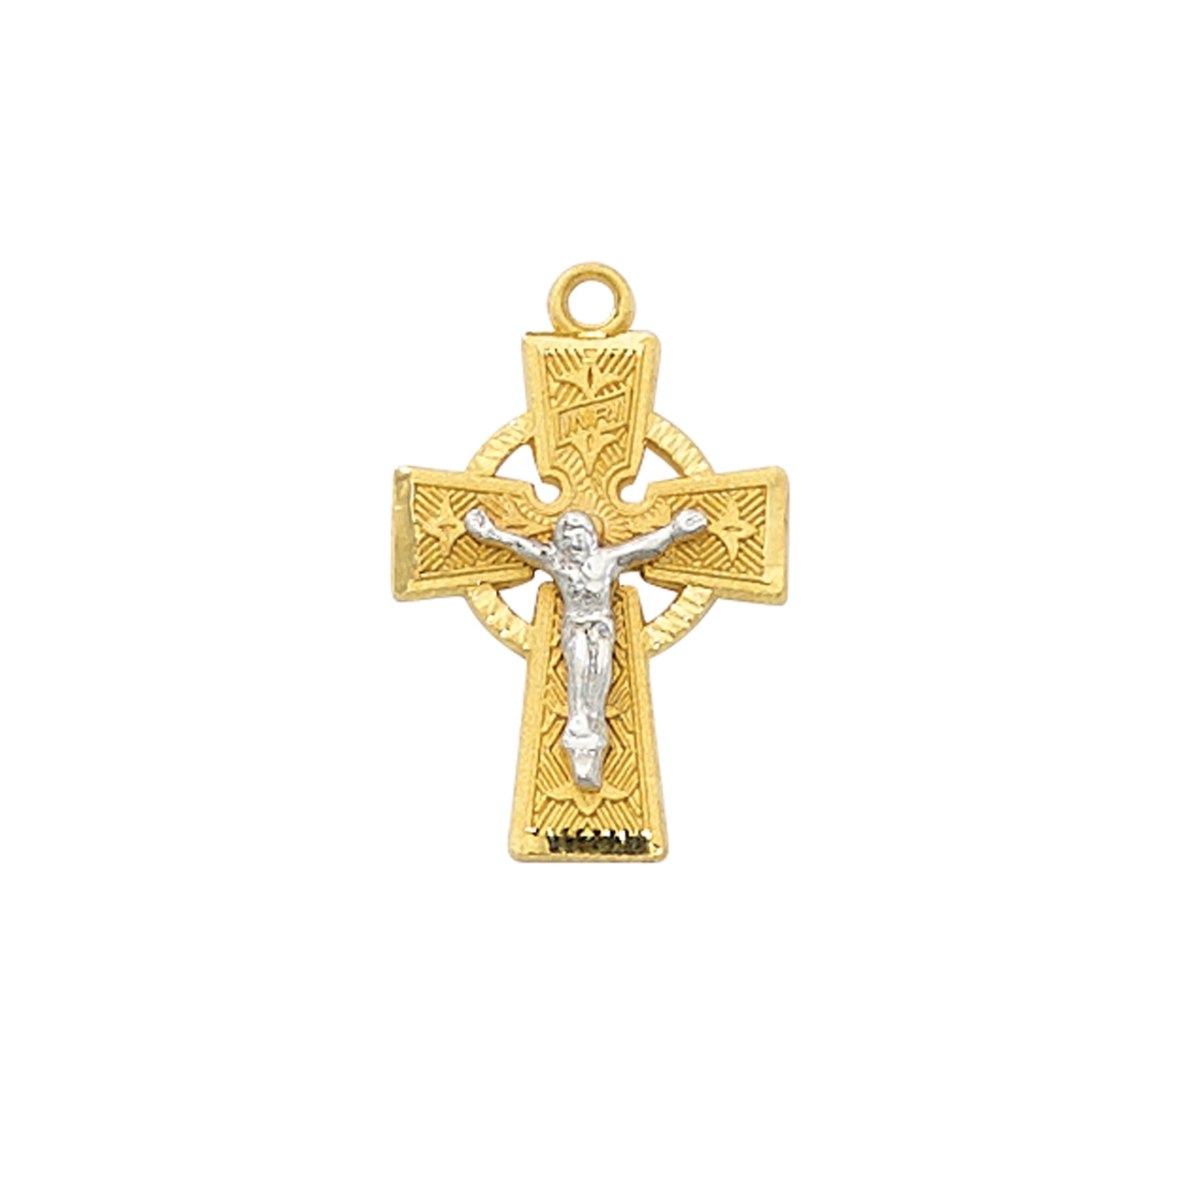 Picture of McVan JT9185 0.95 x 0.62 x 0.11 in. Gold Over Sterling Silver Celtic Crucifix with Chain